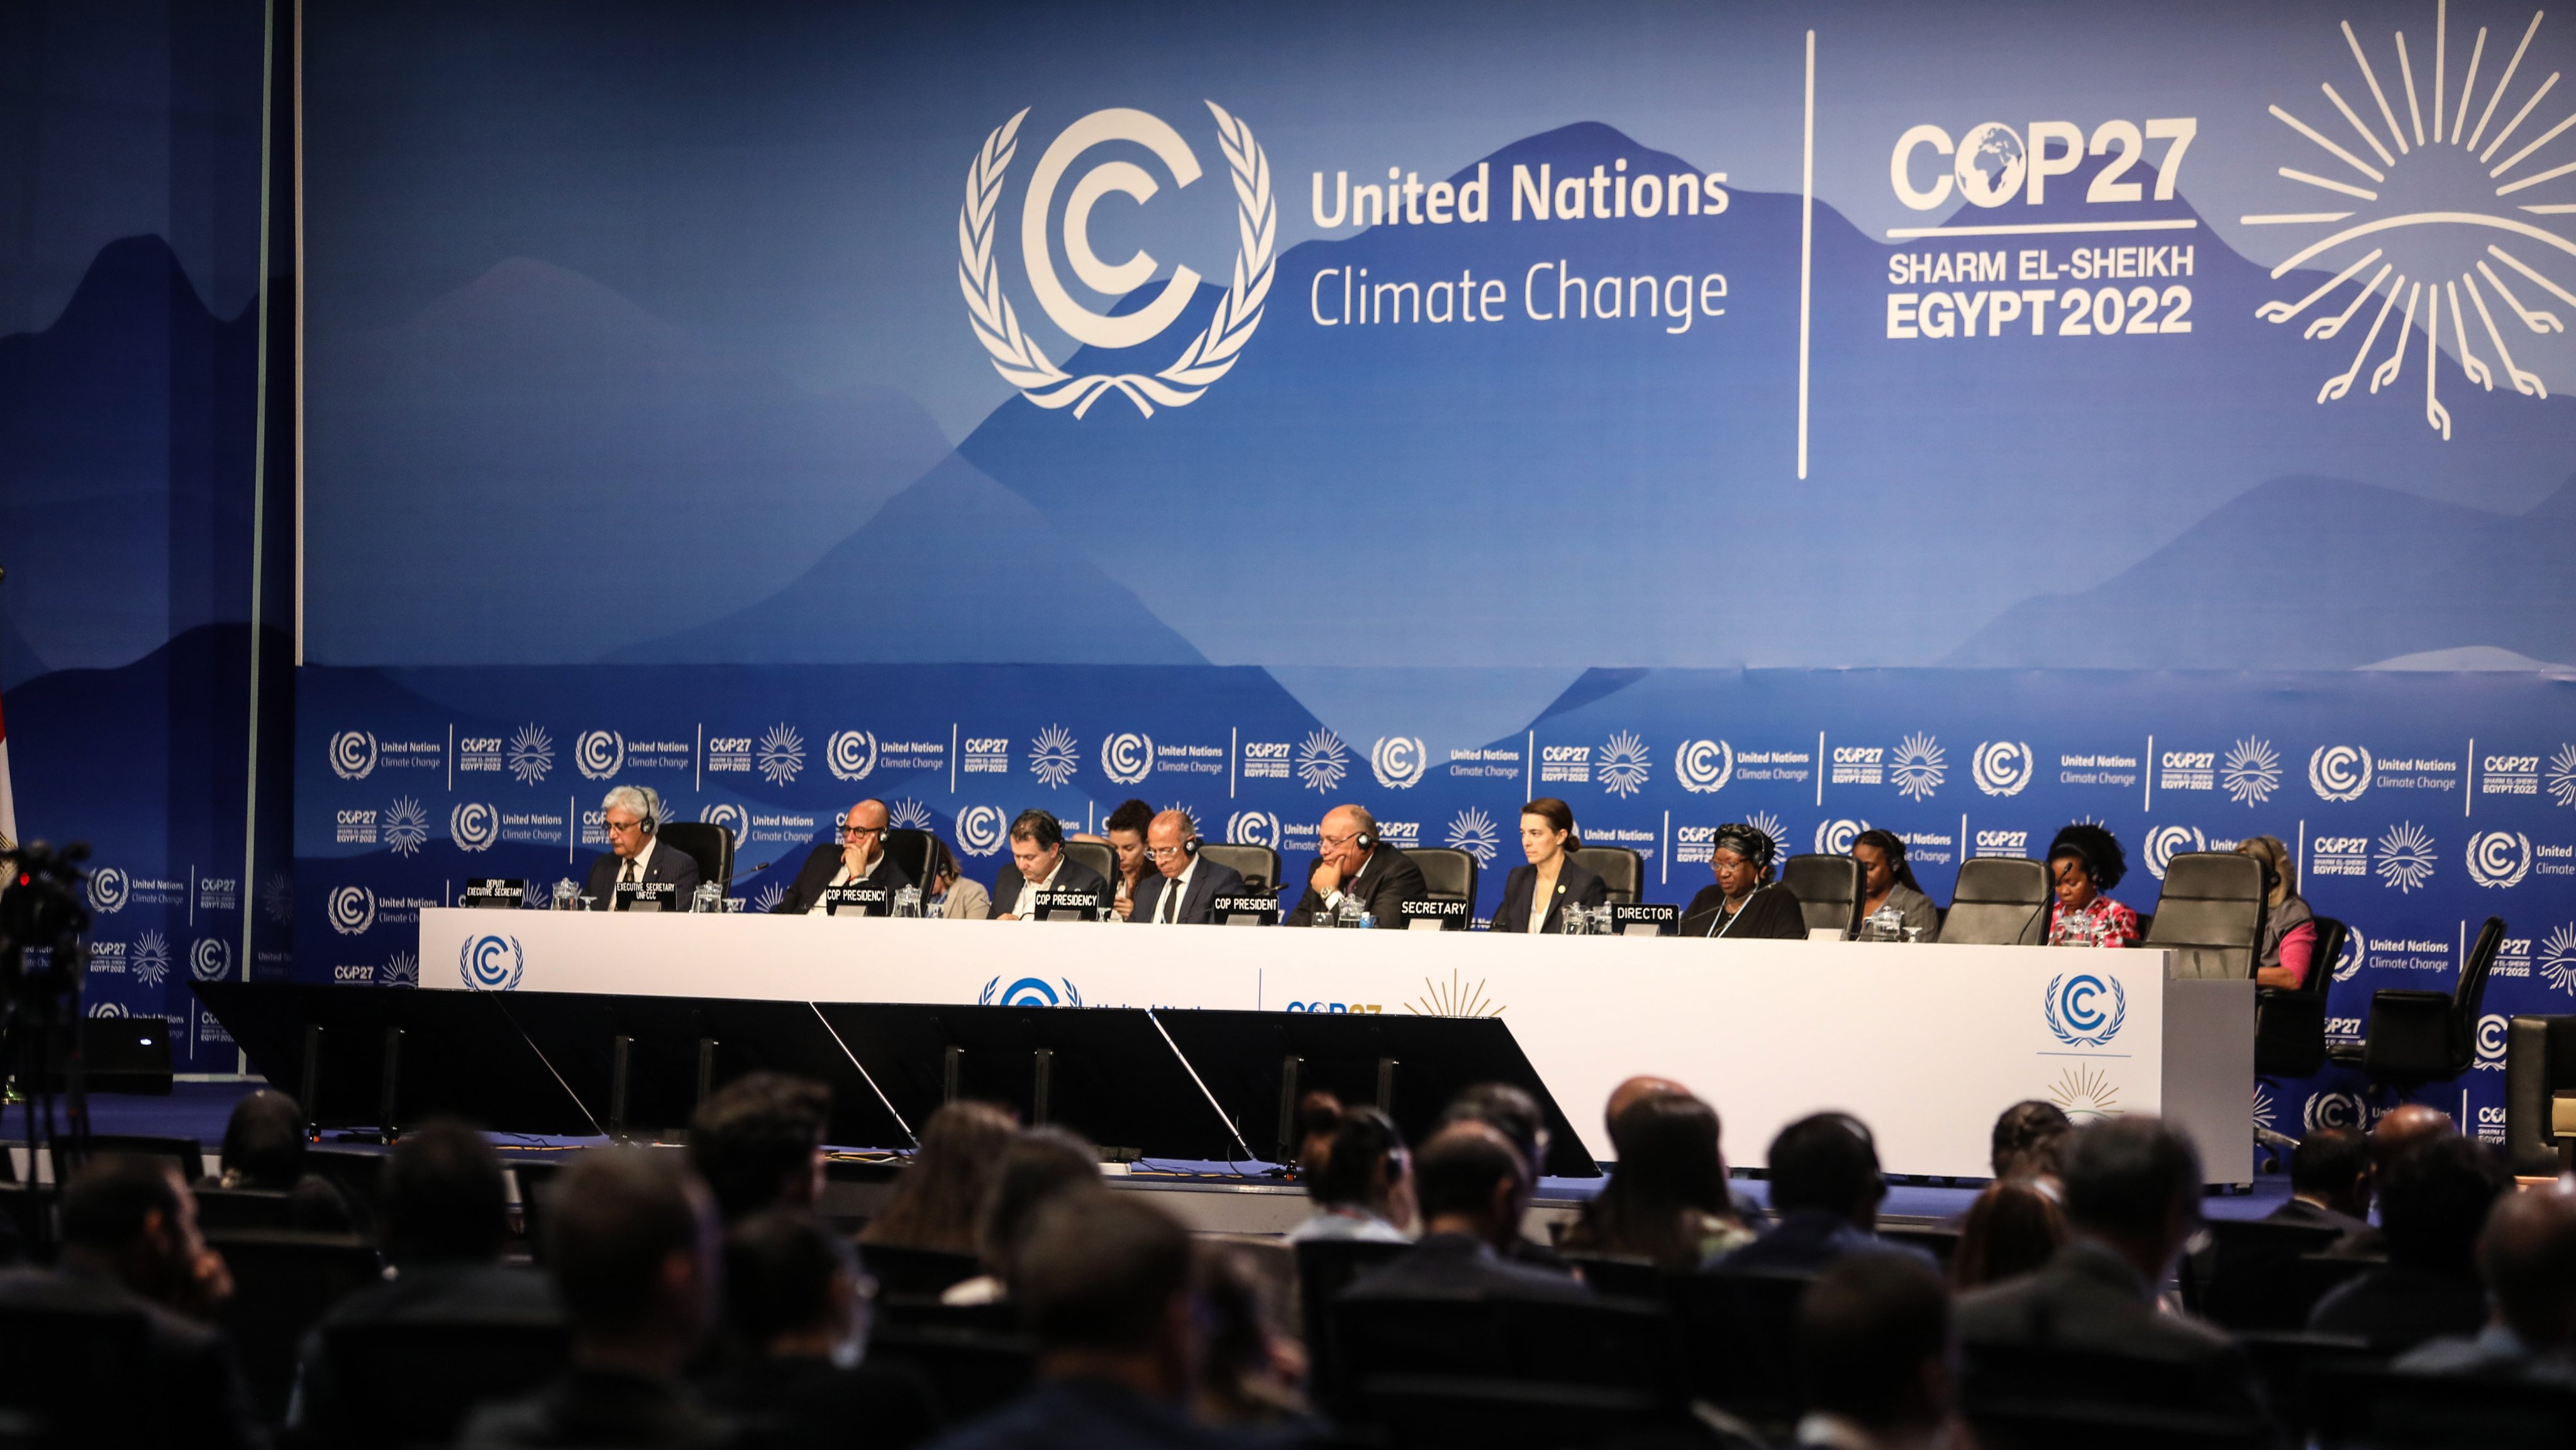 UN climate summit COP27 in Egypt